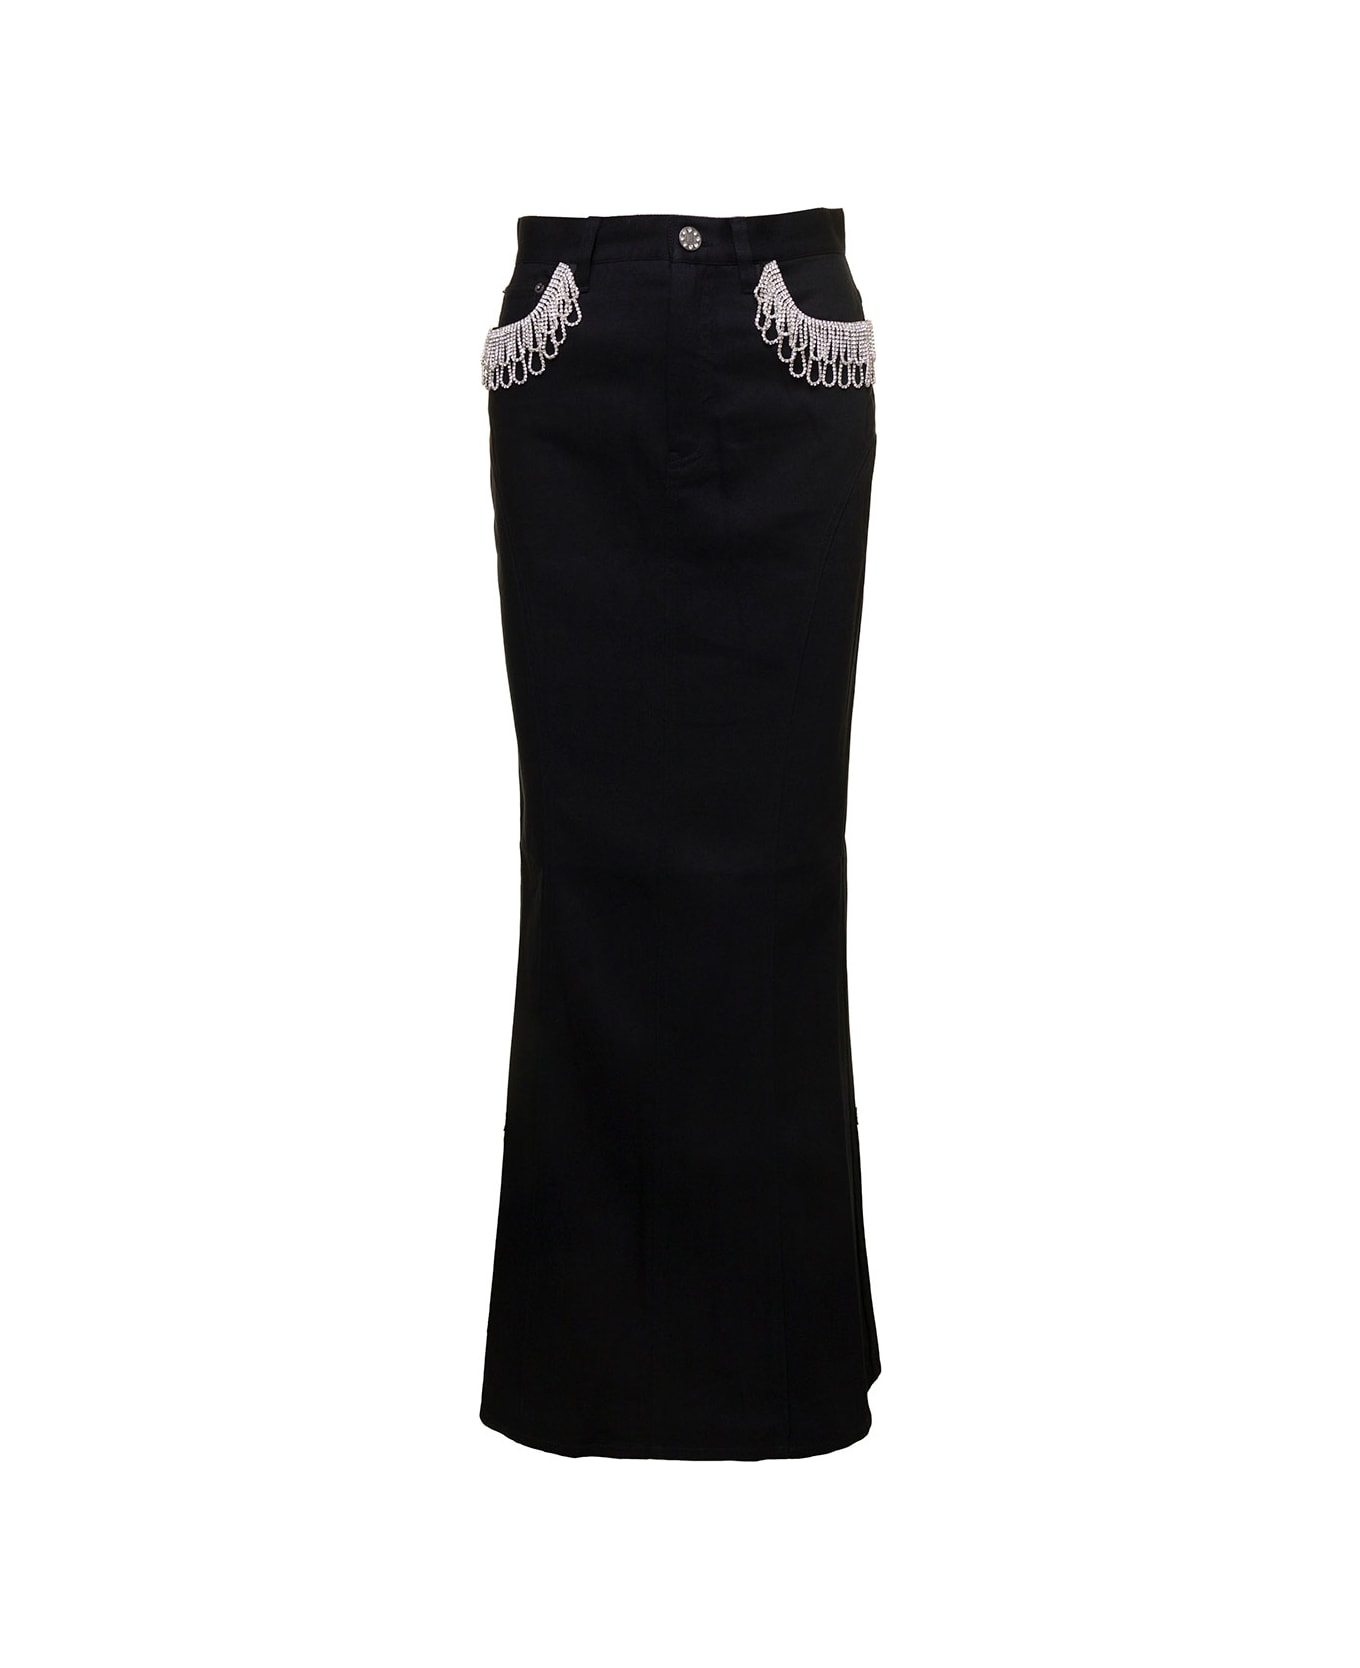 Rotate by Birger Christensen Black Maxi Skirt With Jewel Details Along The Pockets In Cotton Denim Woman - Black